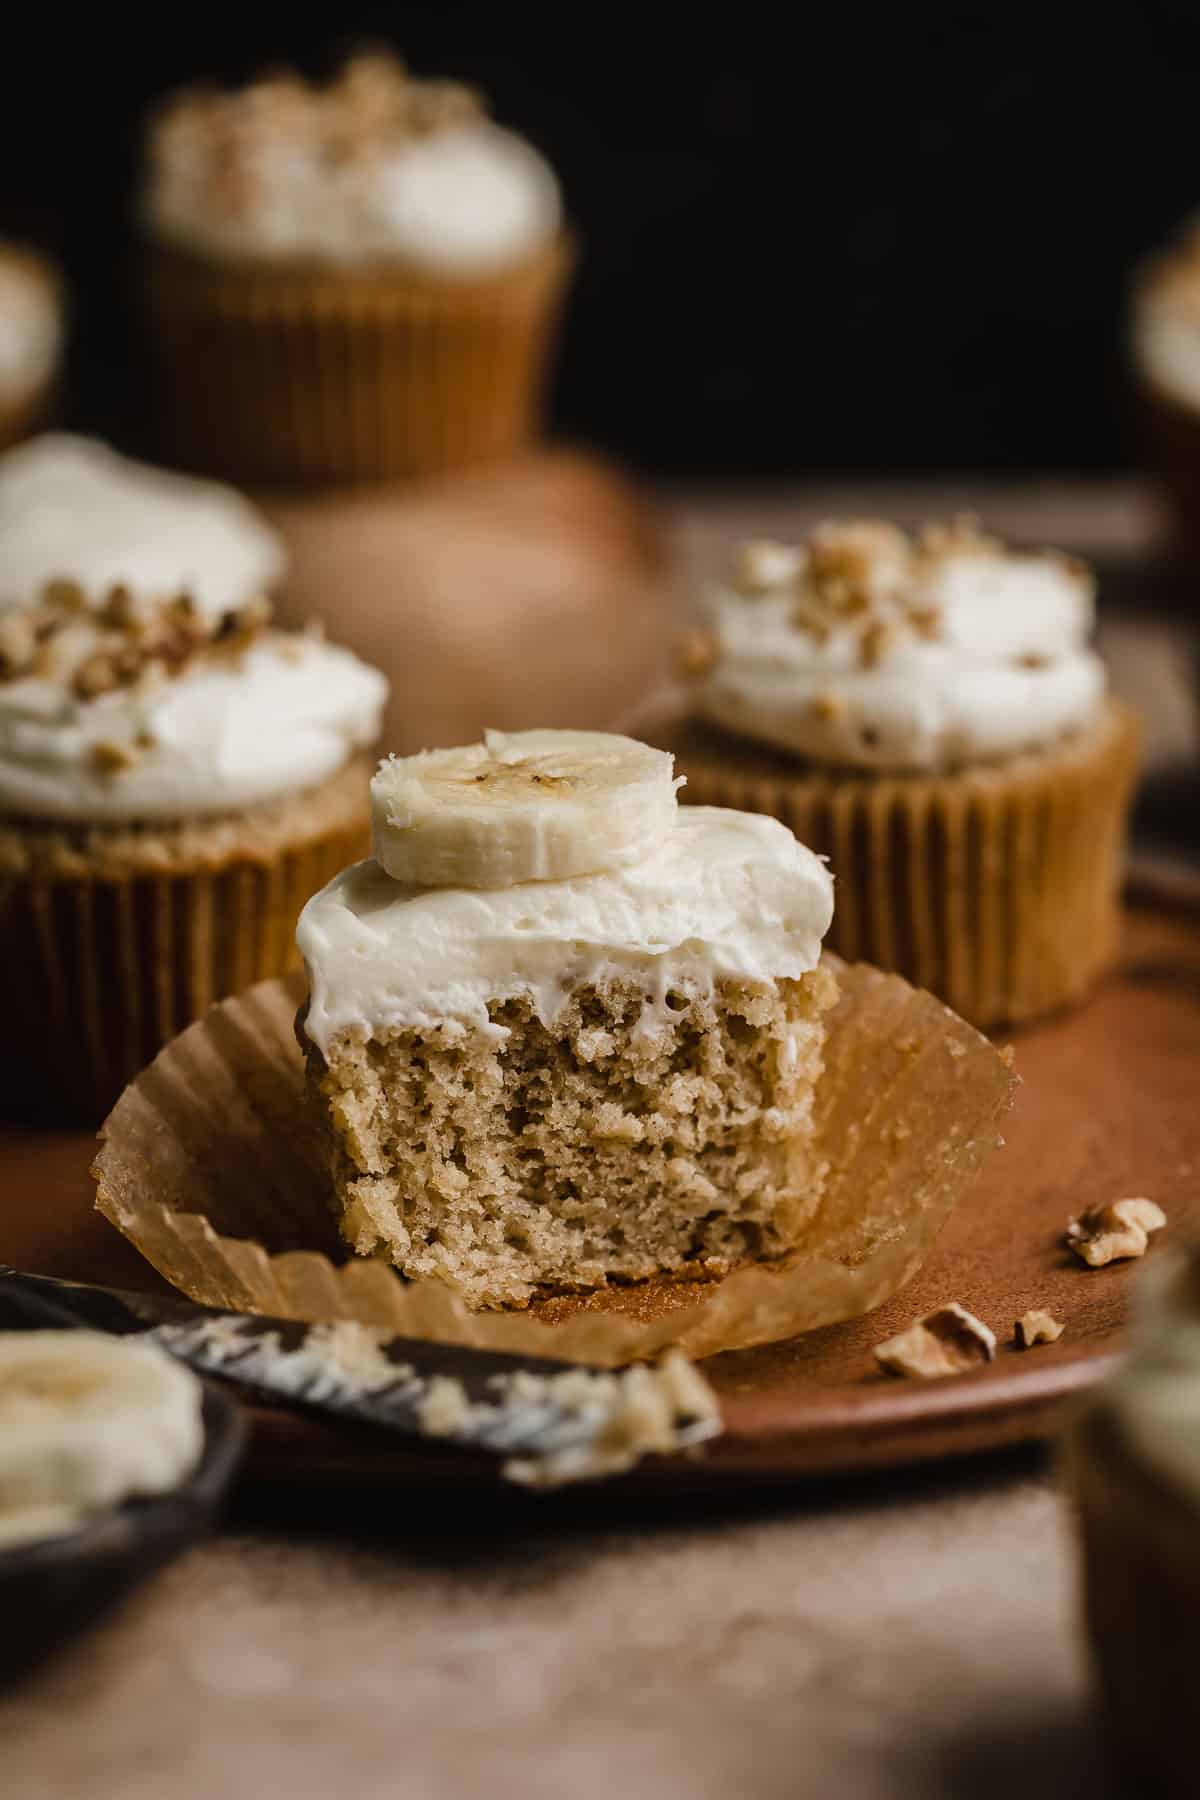 A Banana Cupcake sliced in half, showing how moist the banana cupcake is, and topped with a cream cheese frosting.